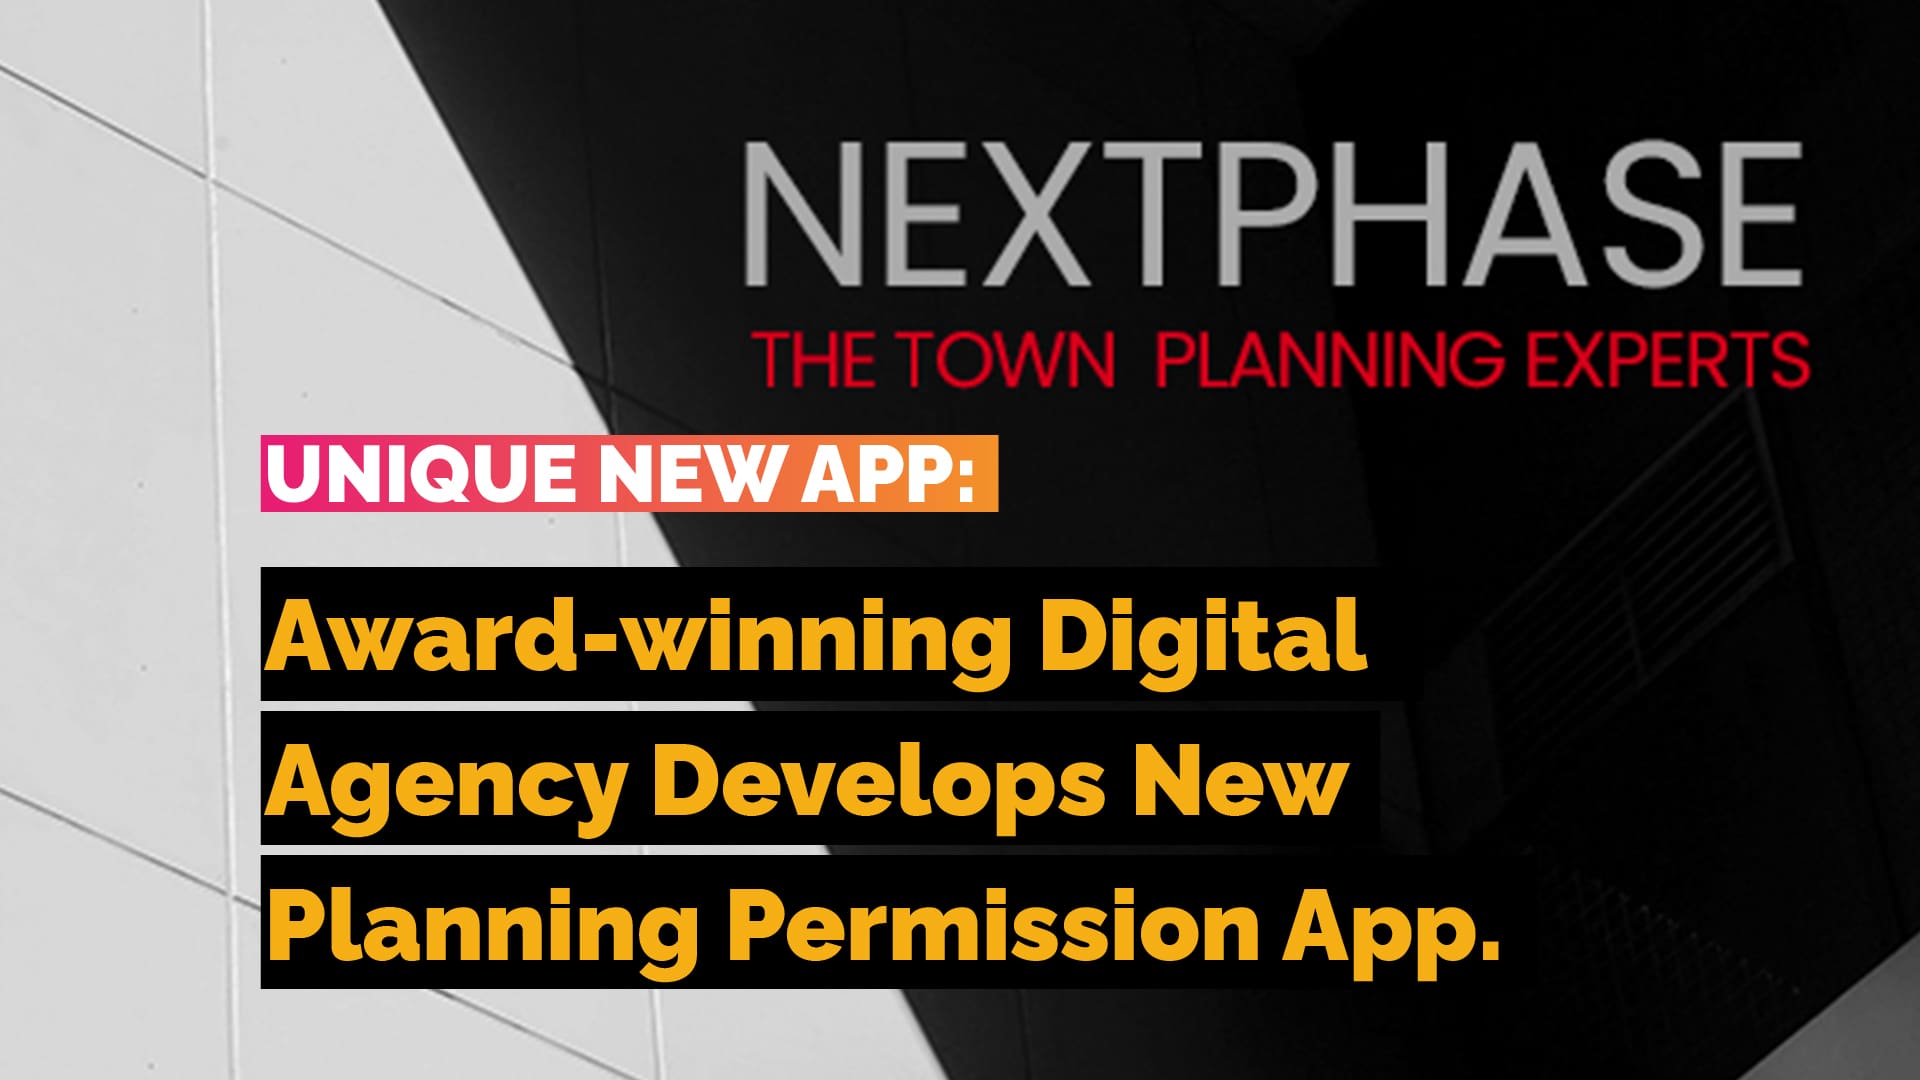 VOiD Partners with NextPhase to Deliver Planning Permission App